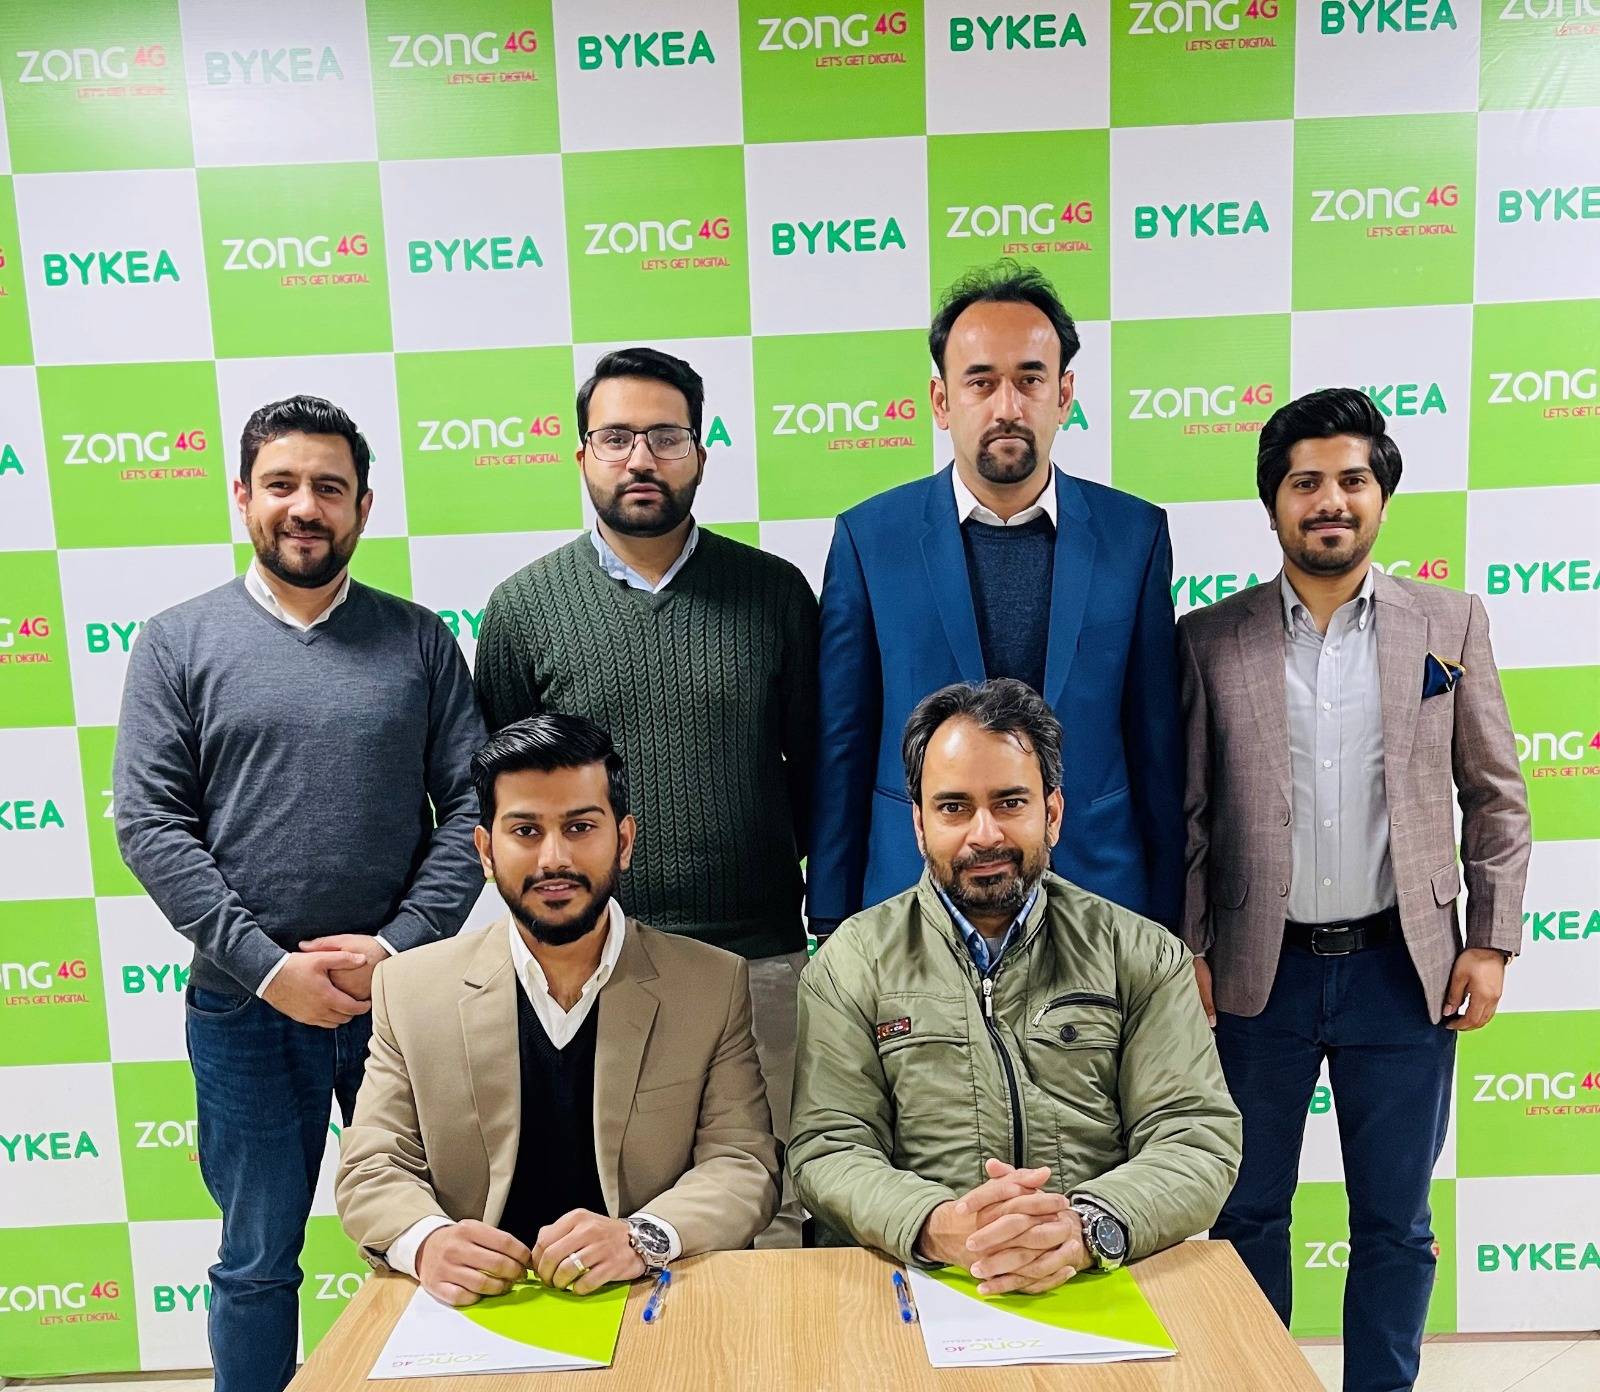 ZONG 4G Partners with BYKEA to offer bundles and top-ups on the app.